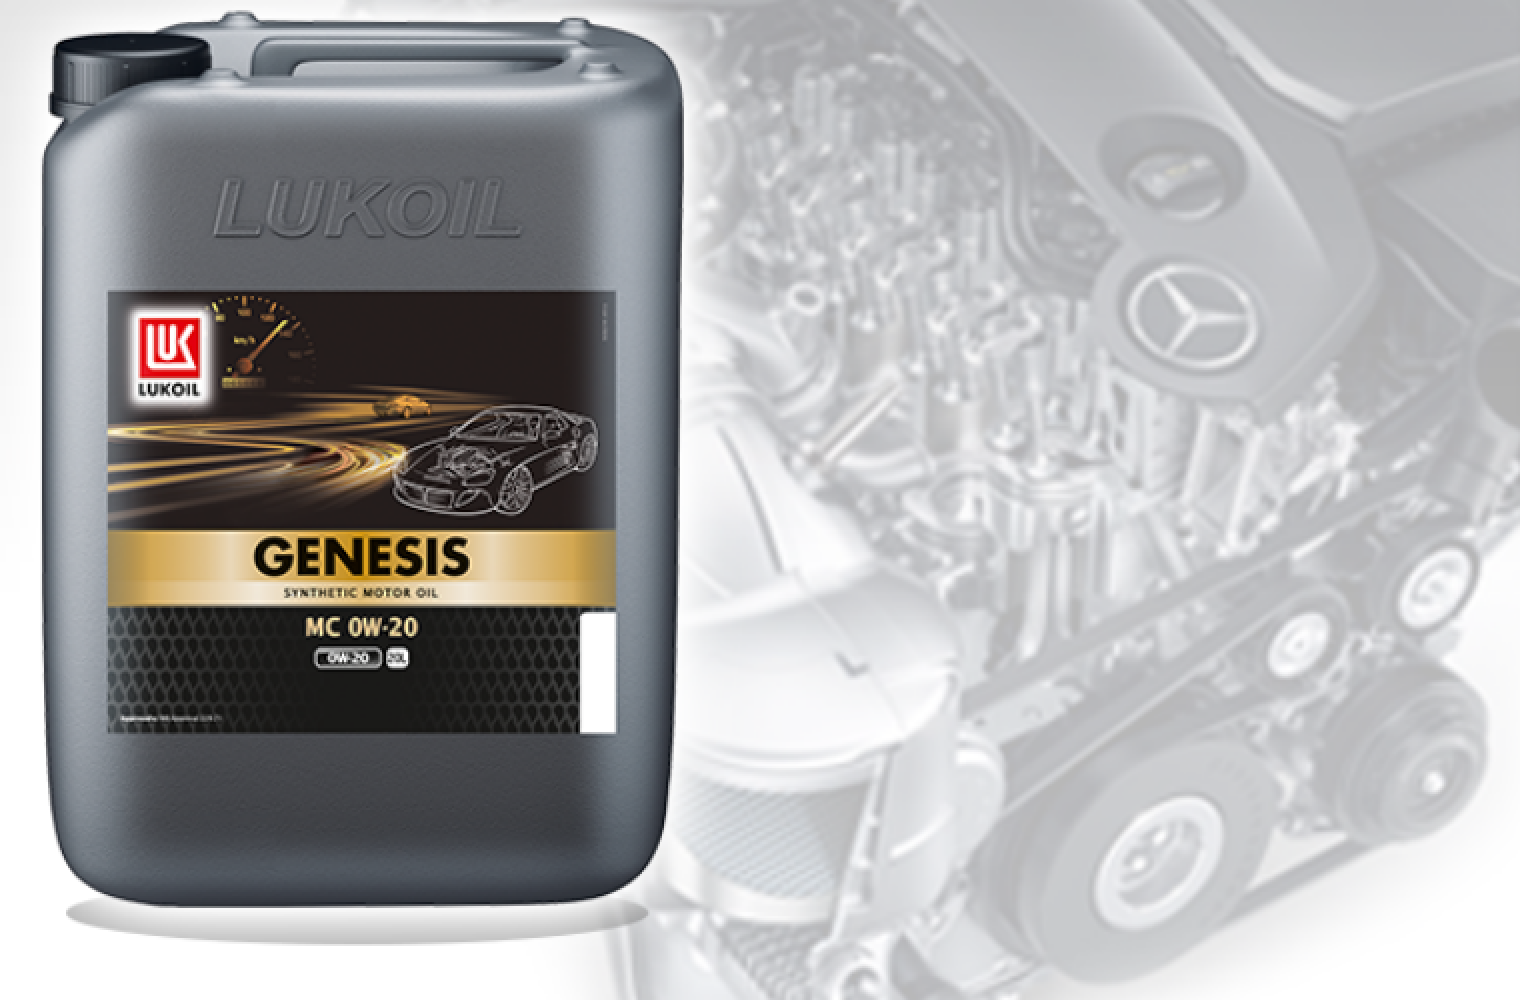 Масло лукойл 0w 20. Lukoil Genesis 0w20. Генезис Лукойл 0-w20 Special. Моторное масло Лукойл 0w20. Genesis Special dx1 0w-20.